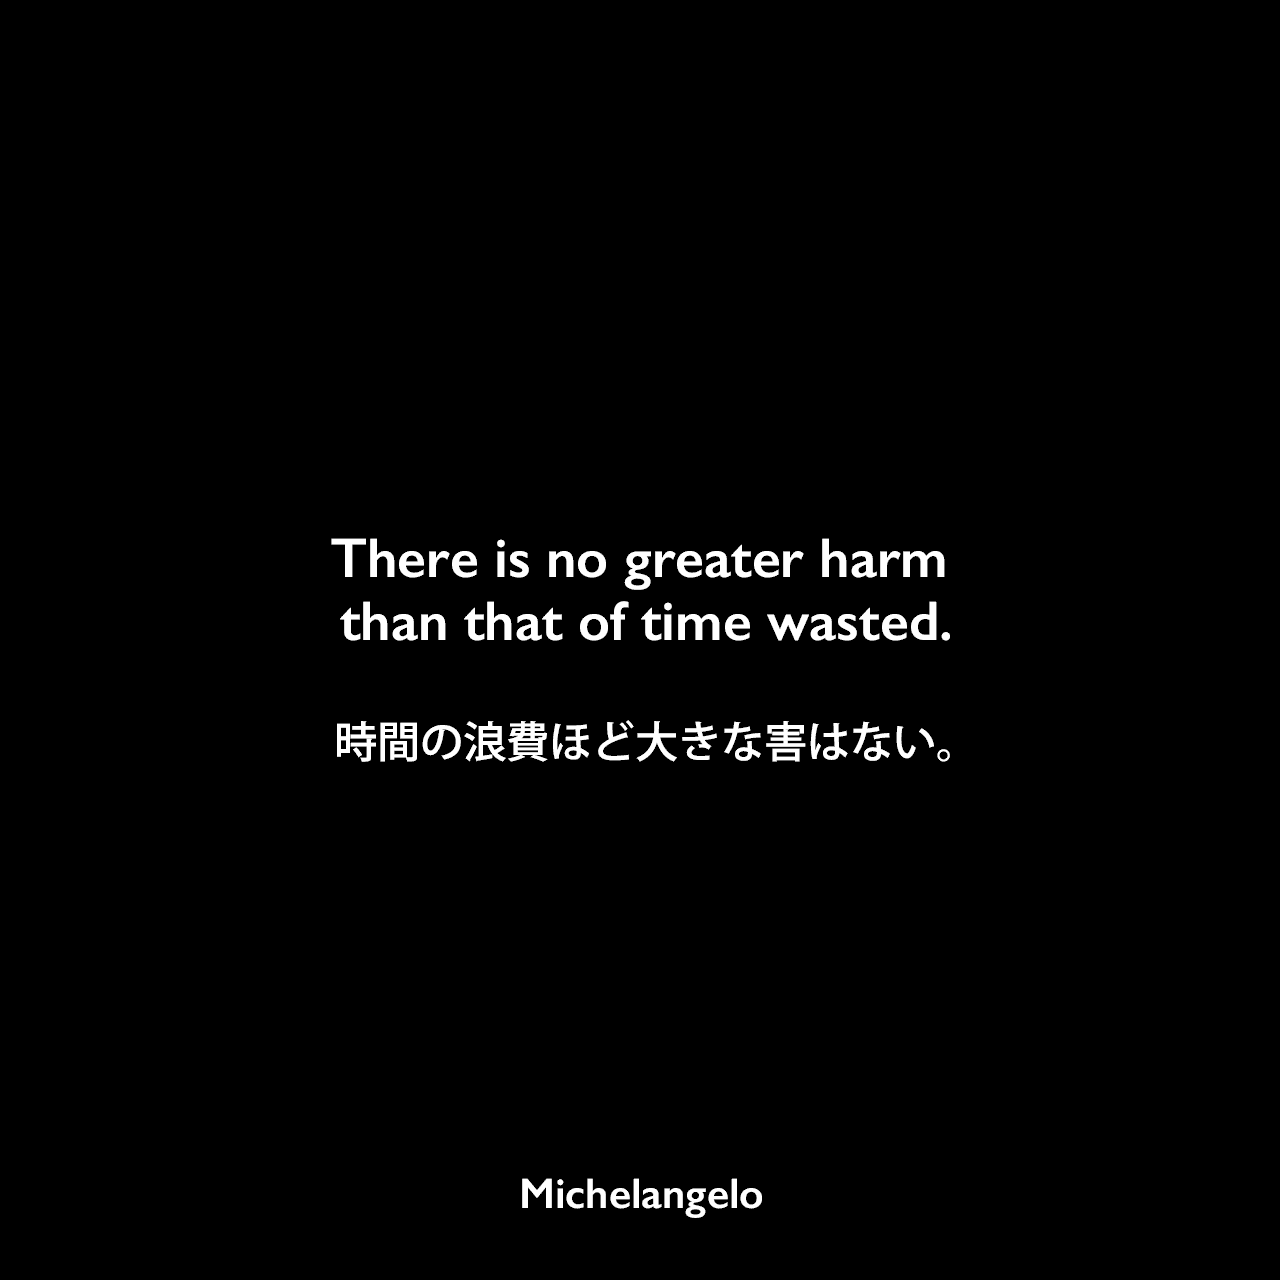 There is no greater harm than that of time wasted.時間の浪費ほど大きな害はない。